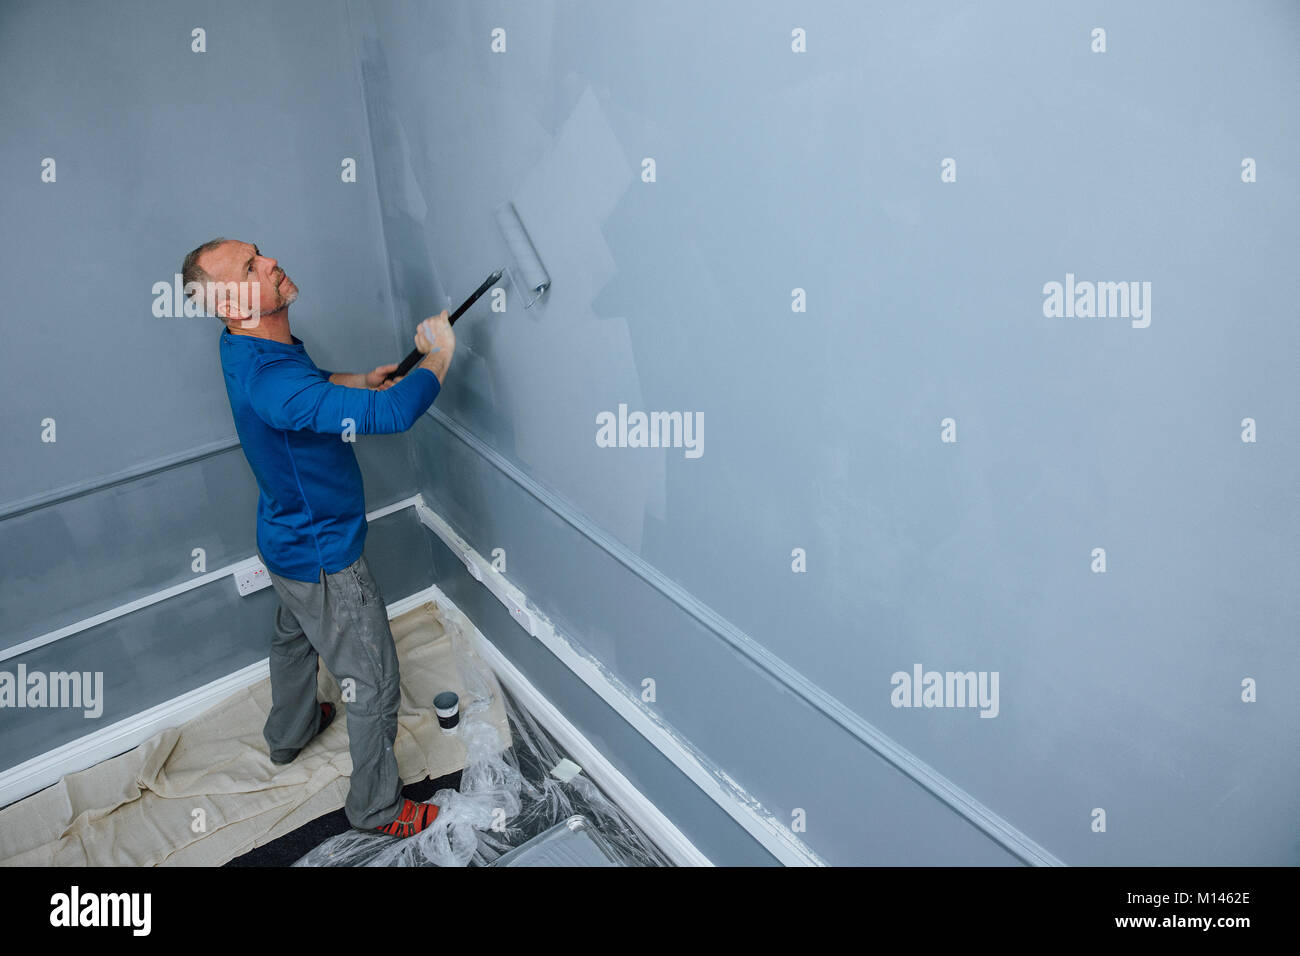 High Angle View Of A Male Builder Using A Roller To Paint Walls Of